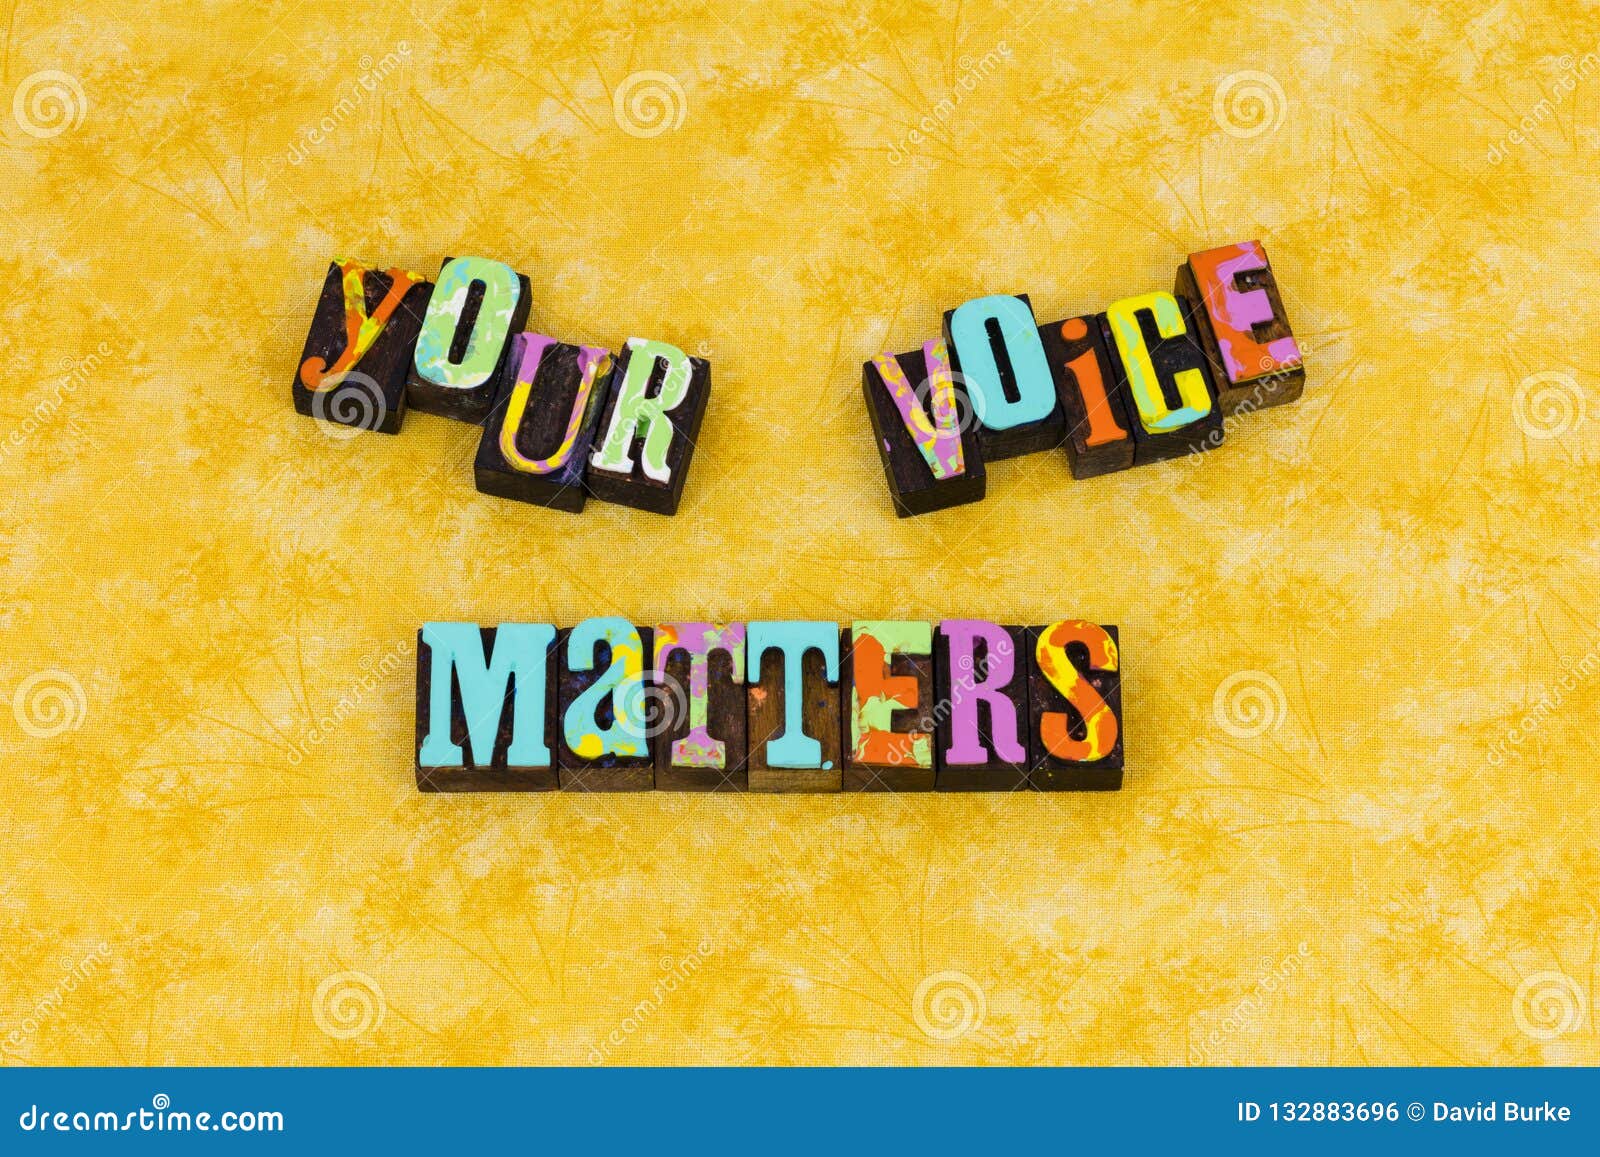 your voice opinion communication matters feedback speak up ideas involved